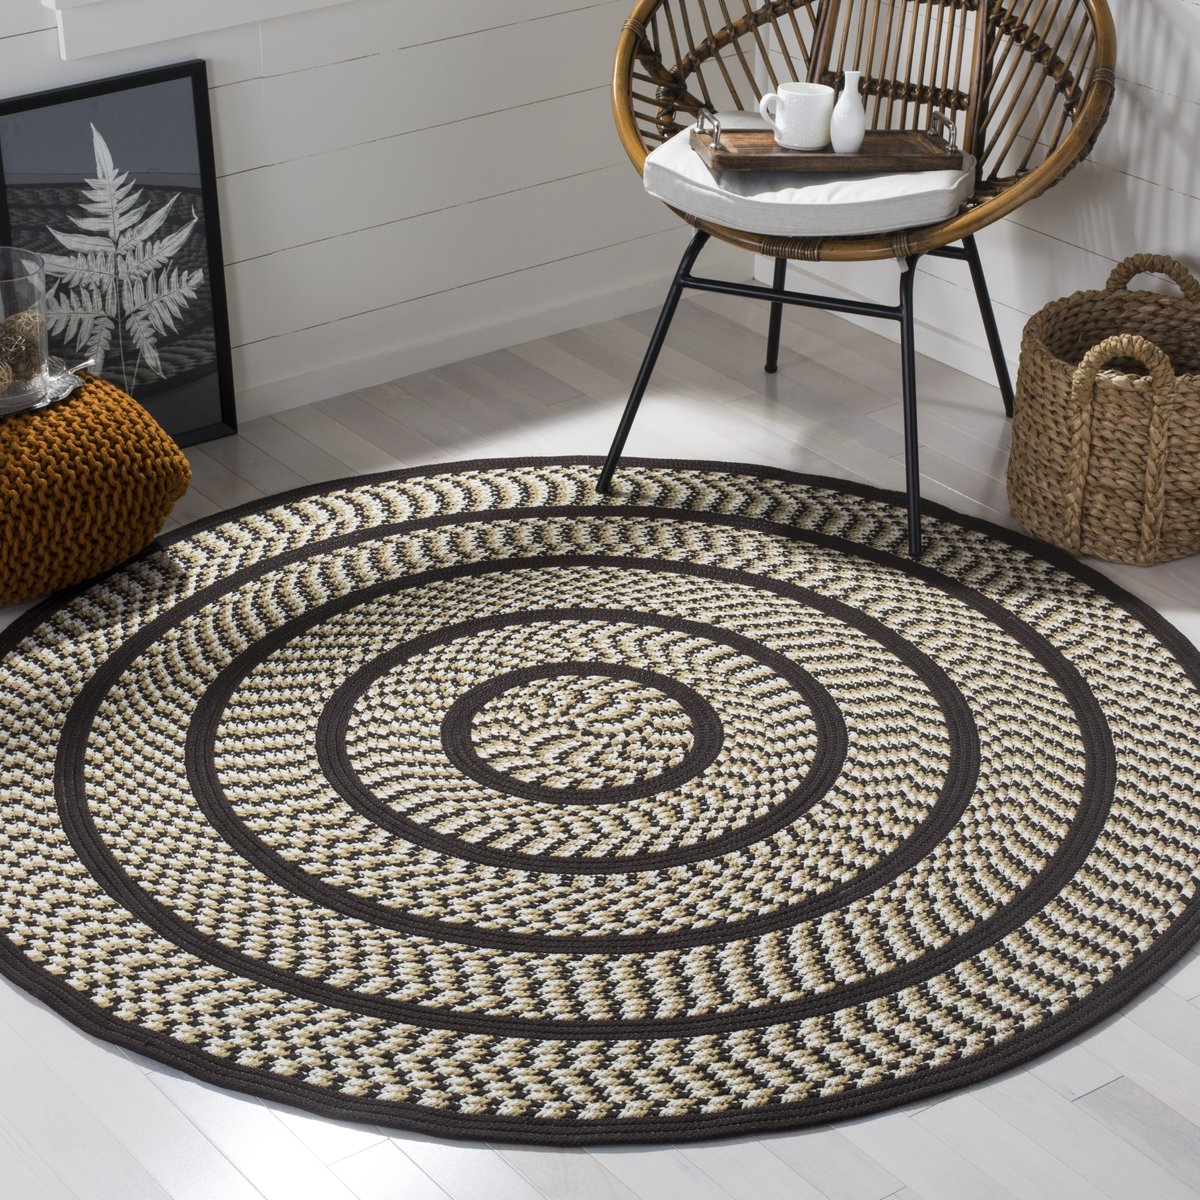  SAFAVIEH Braided Collection Area Rug - 9' x 12' Oval, Brown &  Multi, Handmade Country Cottage Reversible, Ideal for High Traffic Areas in  Living Room, Bedroom (BRD313A) : Home & Kitchen